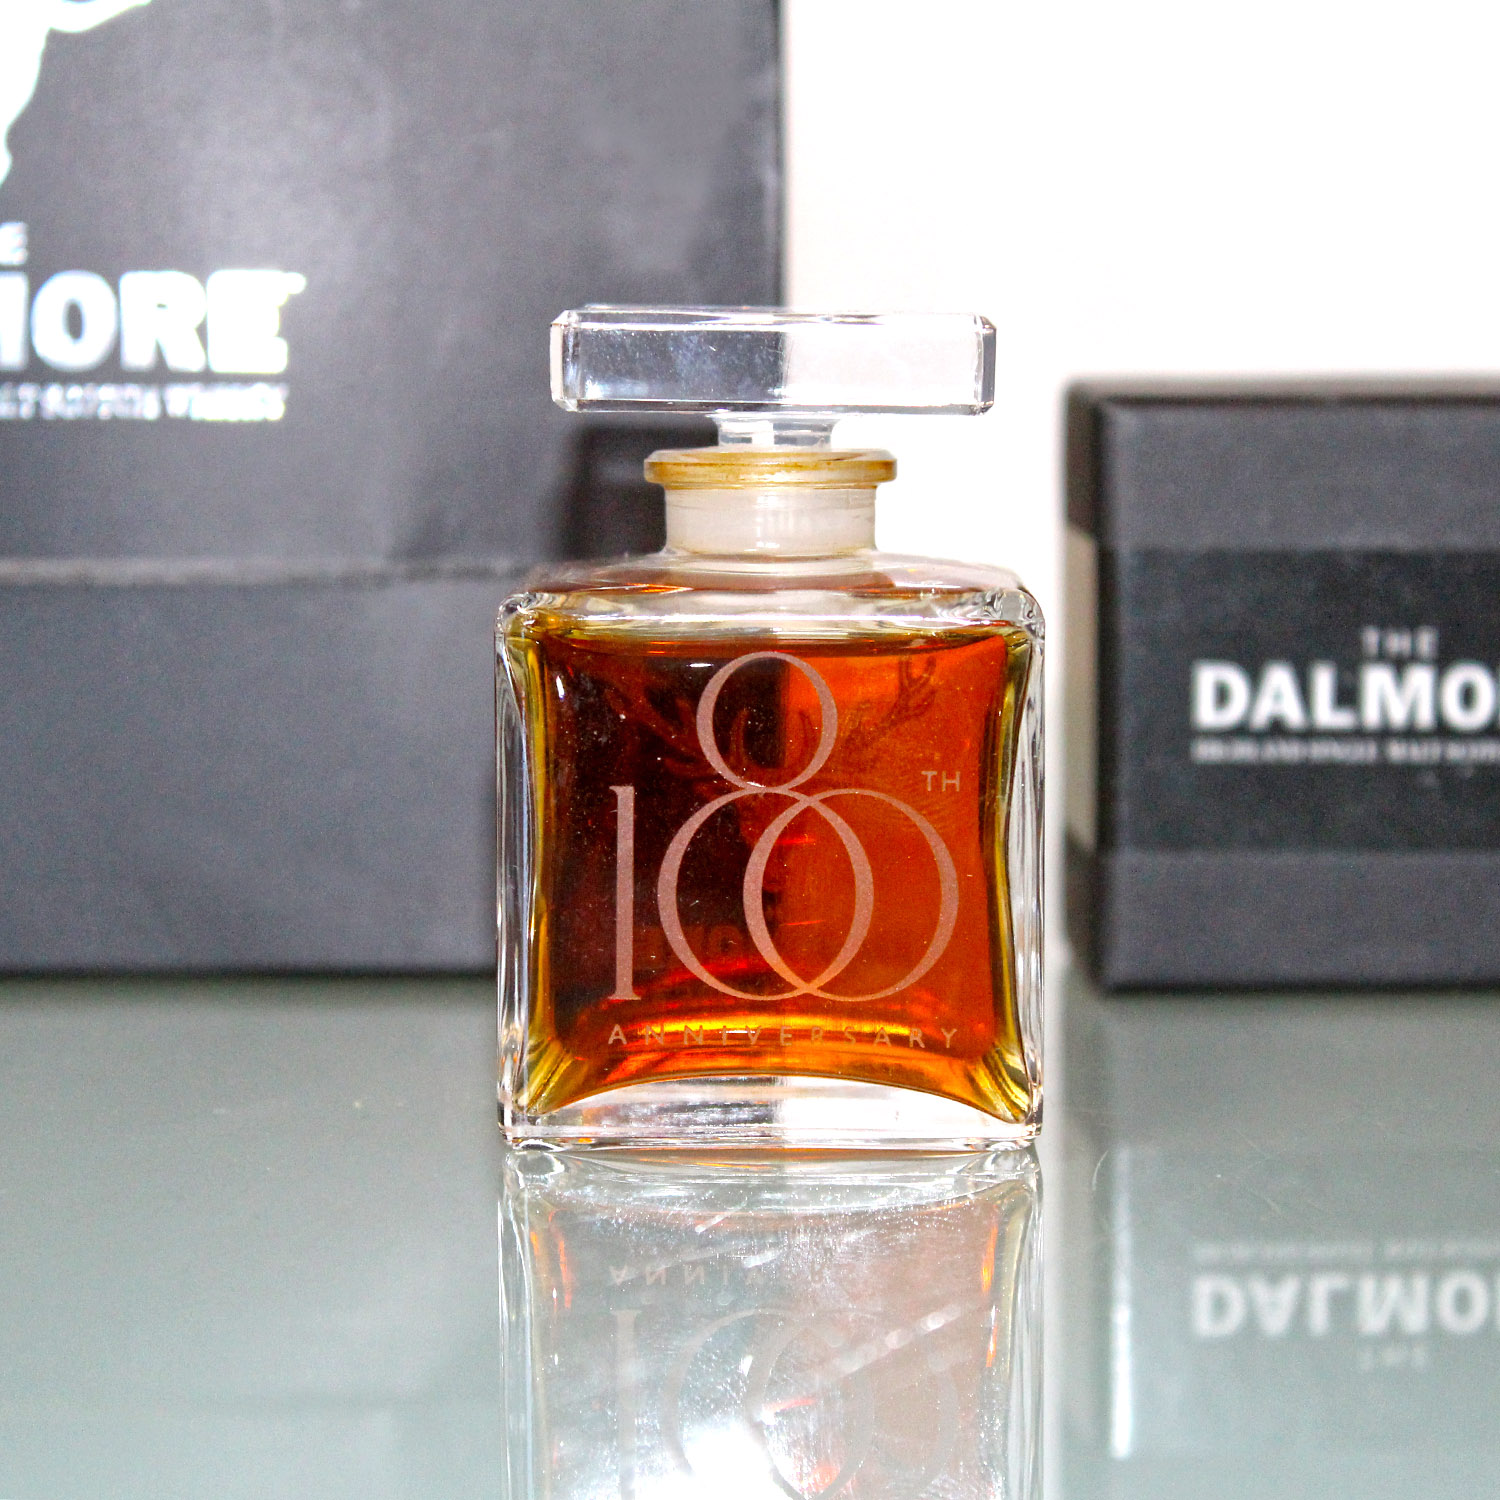 Dalmore 45 Year Old Whisky 180th Anniversary Miniature Bottle